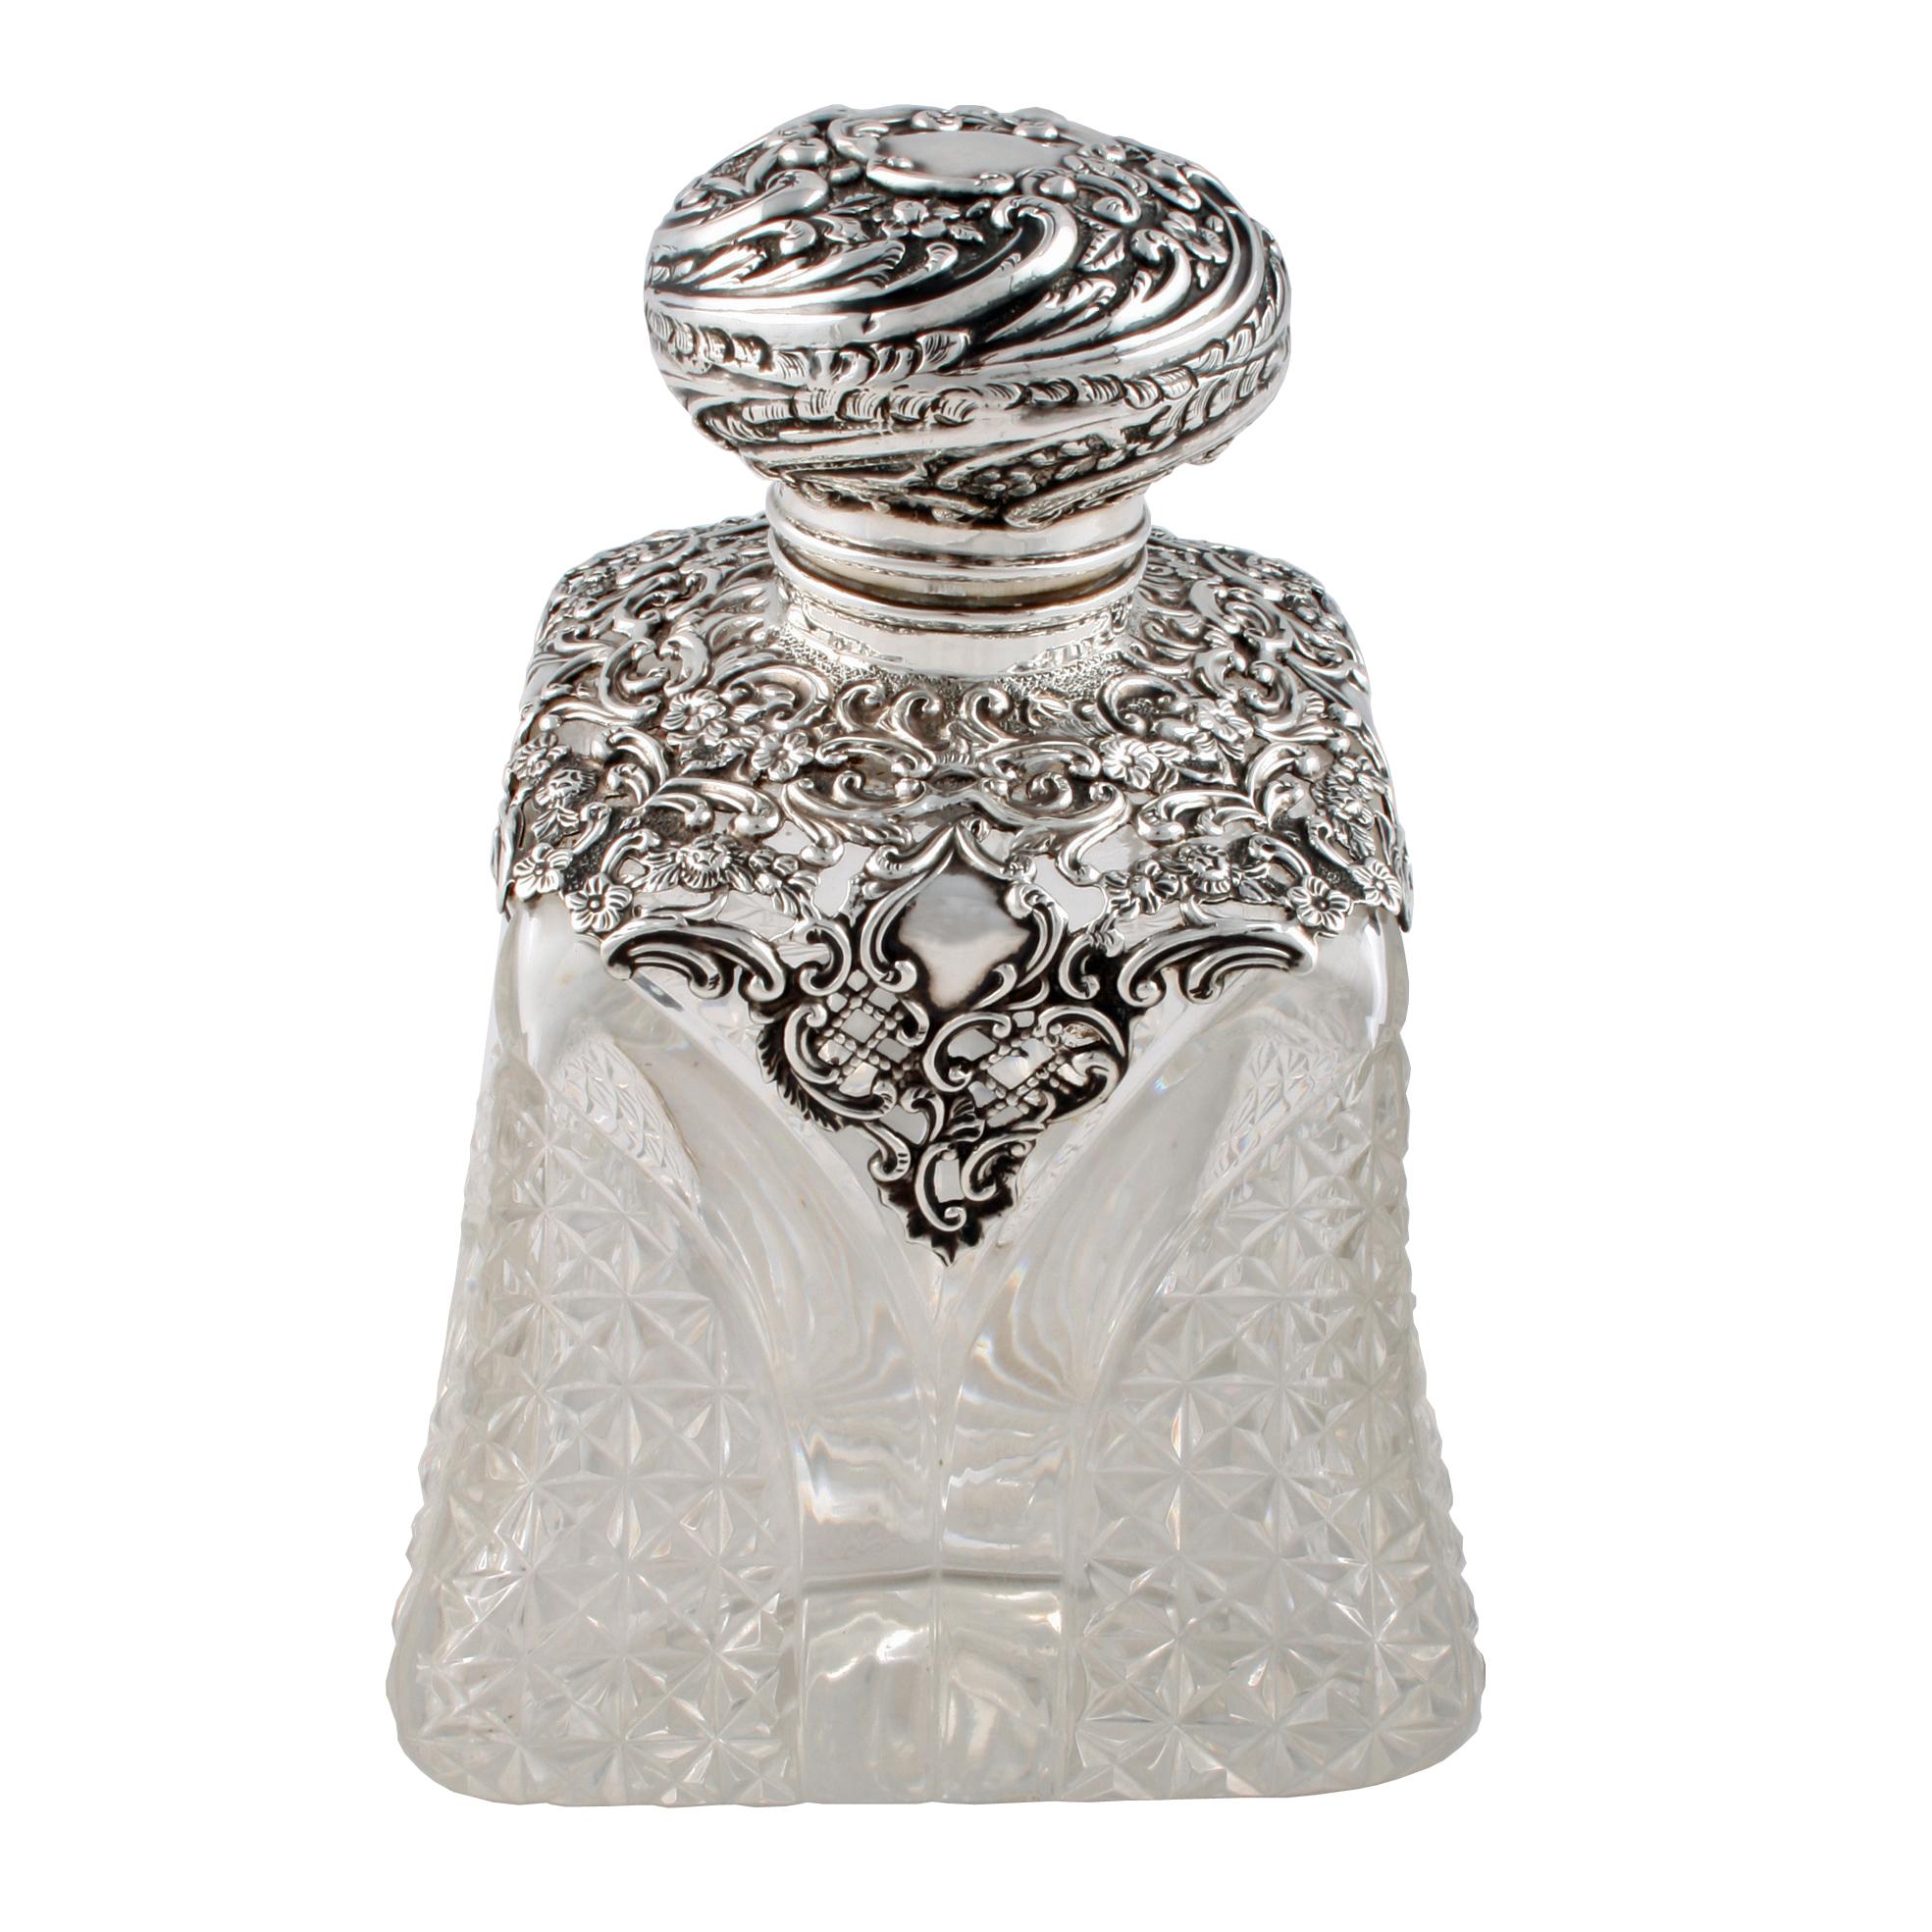 A large late Victorian cut crystal perfume bottle.

The perfume bottle has a sterling silver hall marked collar and hinged lid.

The bottle has a square base with concave heavily cut sides and a square cut underside.

The sterling silver